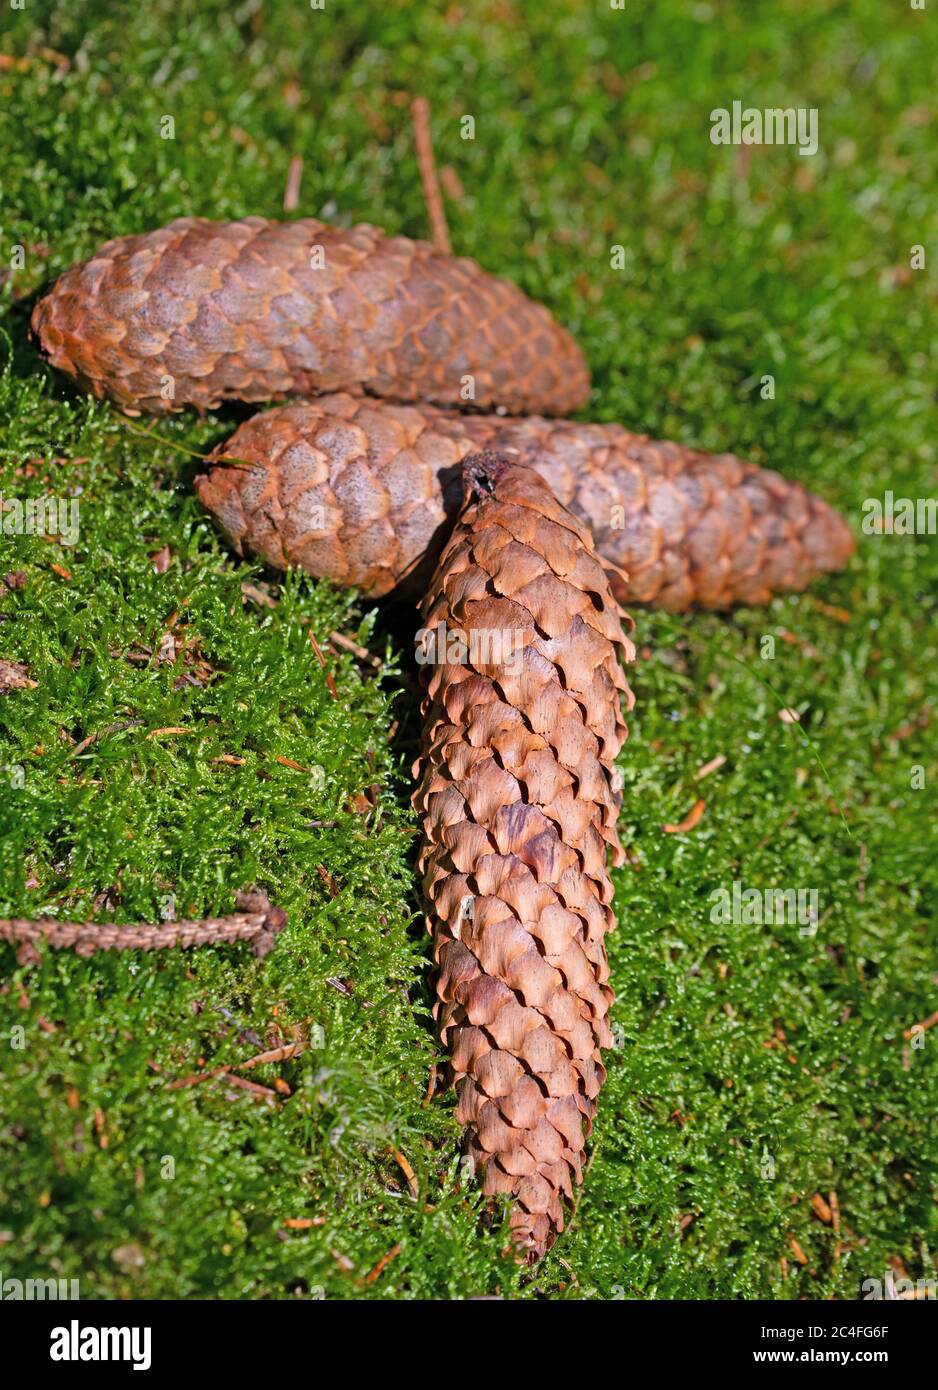 Ripe spruce cones on mossy forest floor Stock Photo